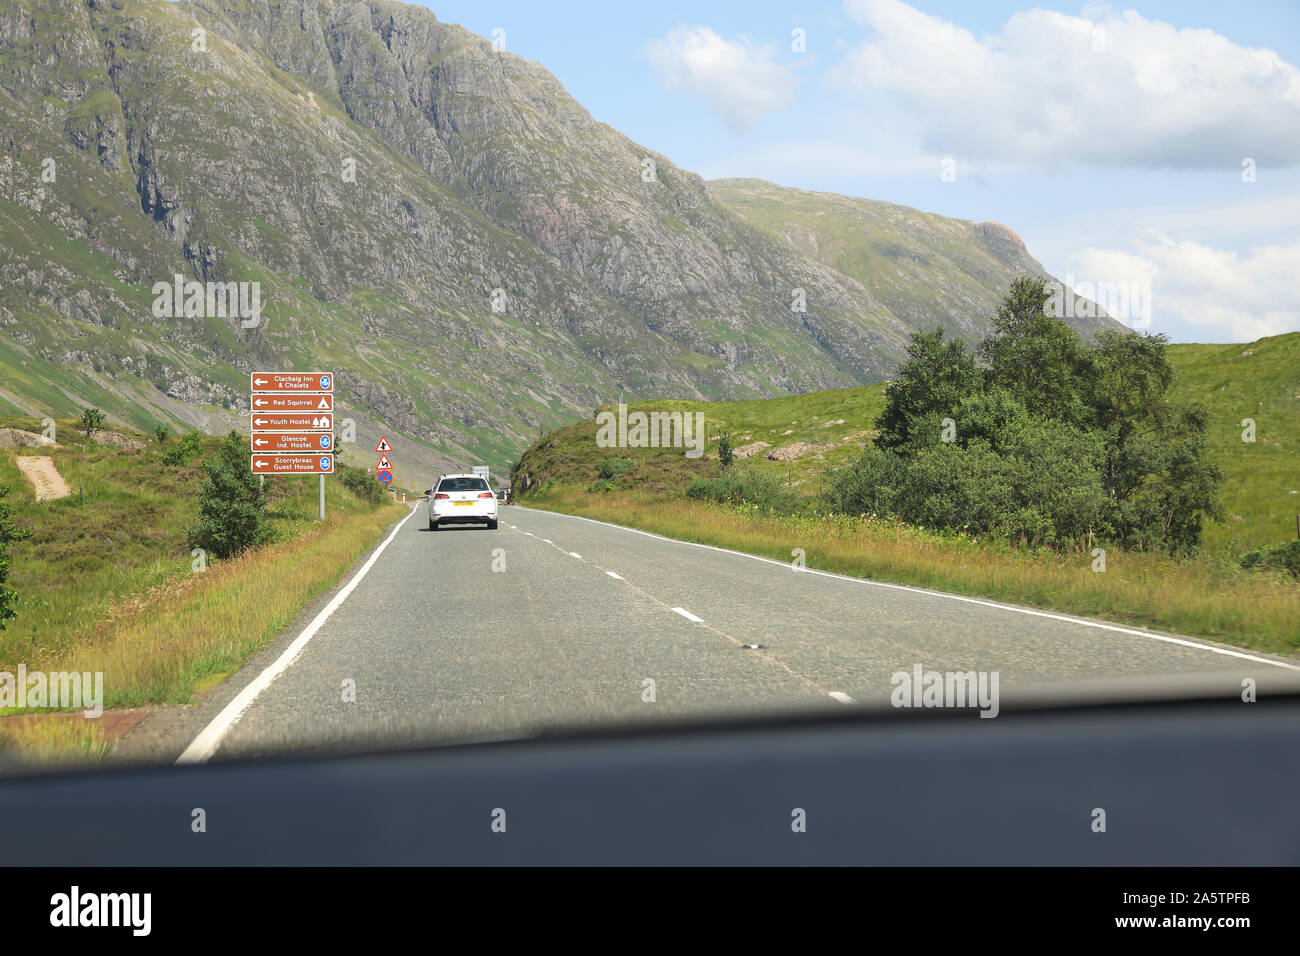 Driving south on the A82 through the spectacular mountains of Glencoe, in the Scottish Highlands, UK Stock Photo